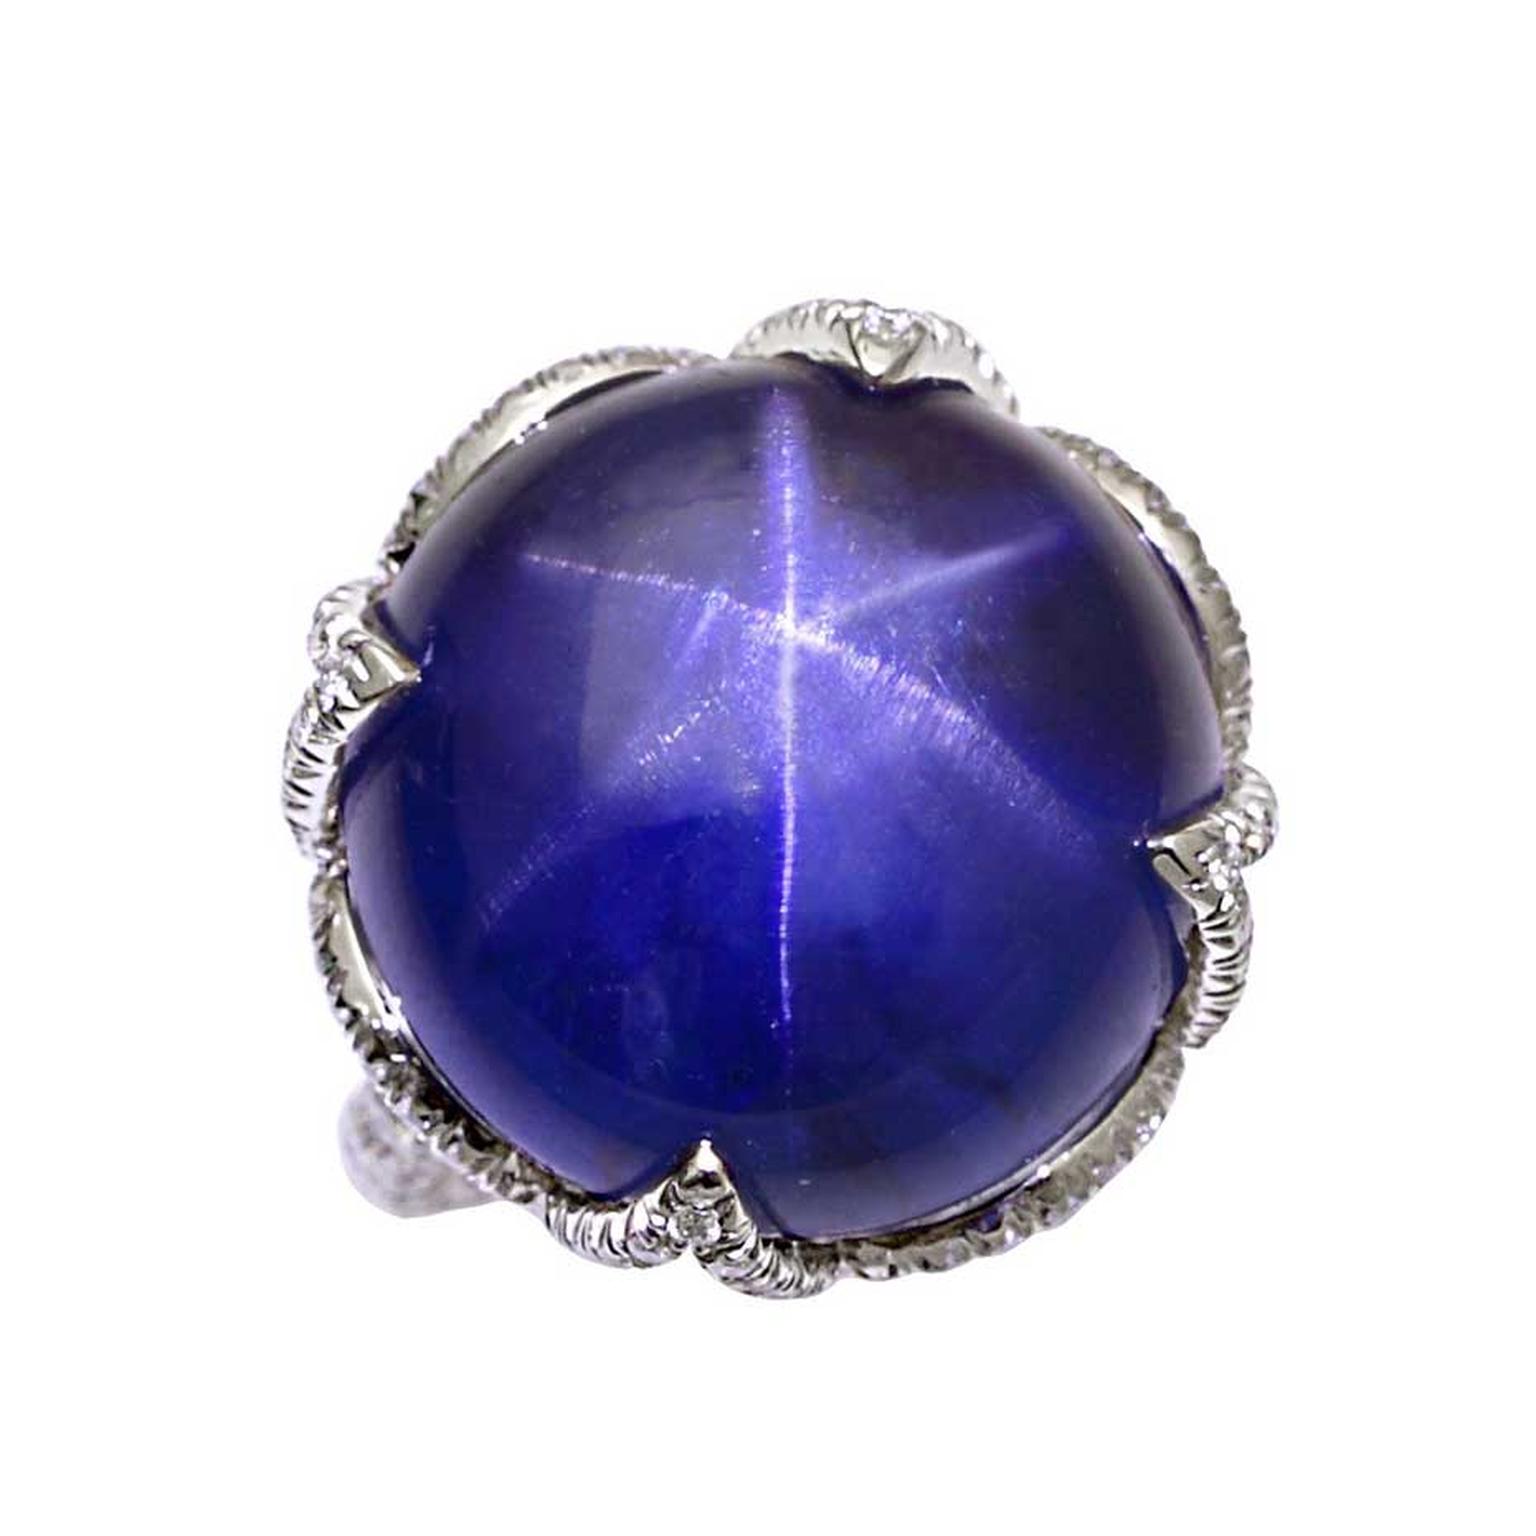 Natural star sapphire lotus ring in platinum with diamonds. Available at 1stdibs.com.